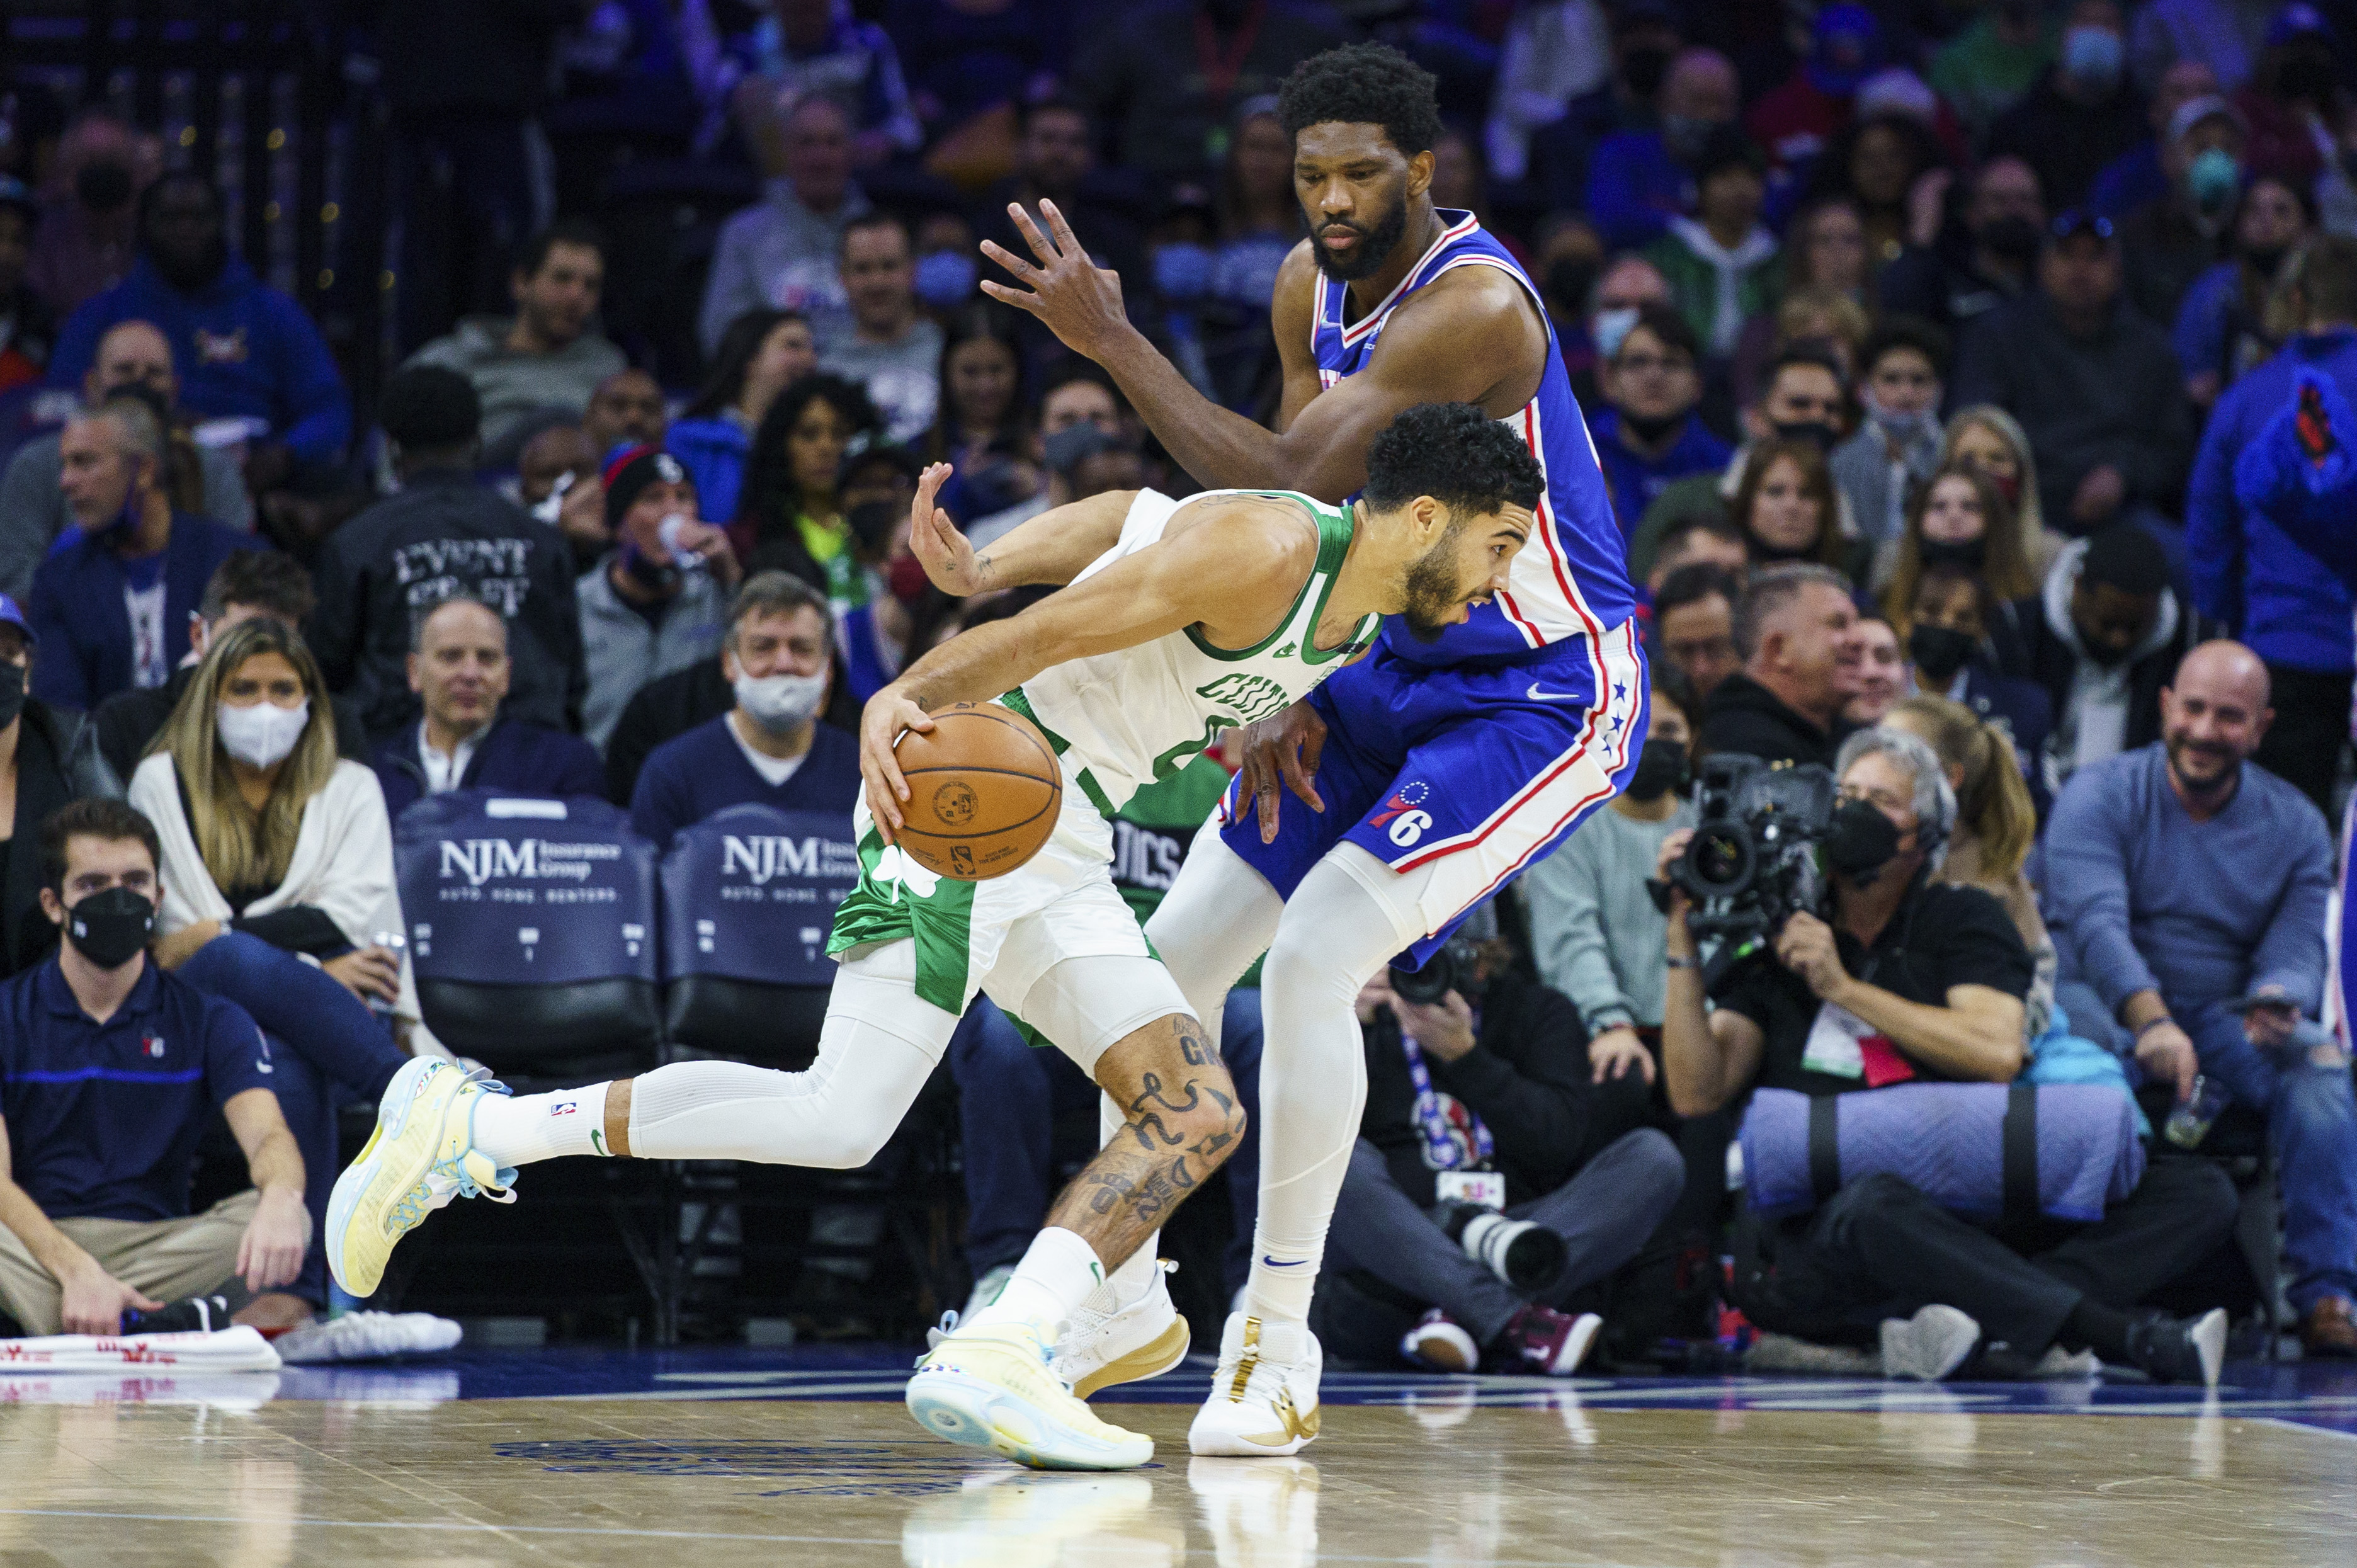 NBA Opening Night: How to Watch 76ers vs. Celtics, Lakers vs